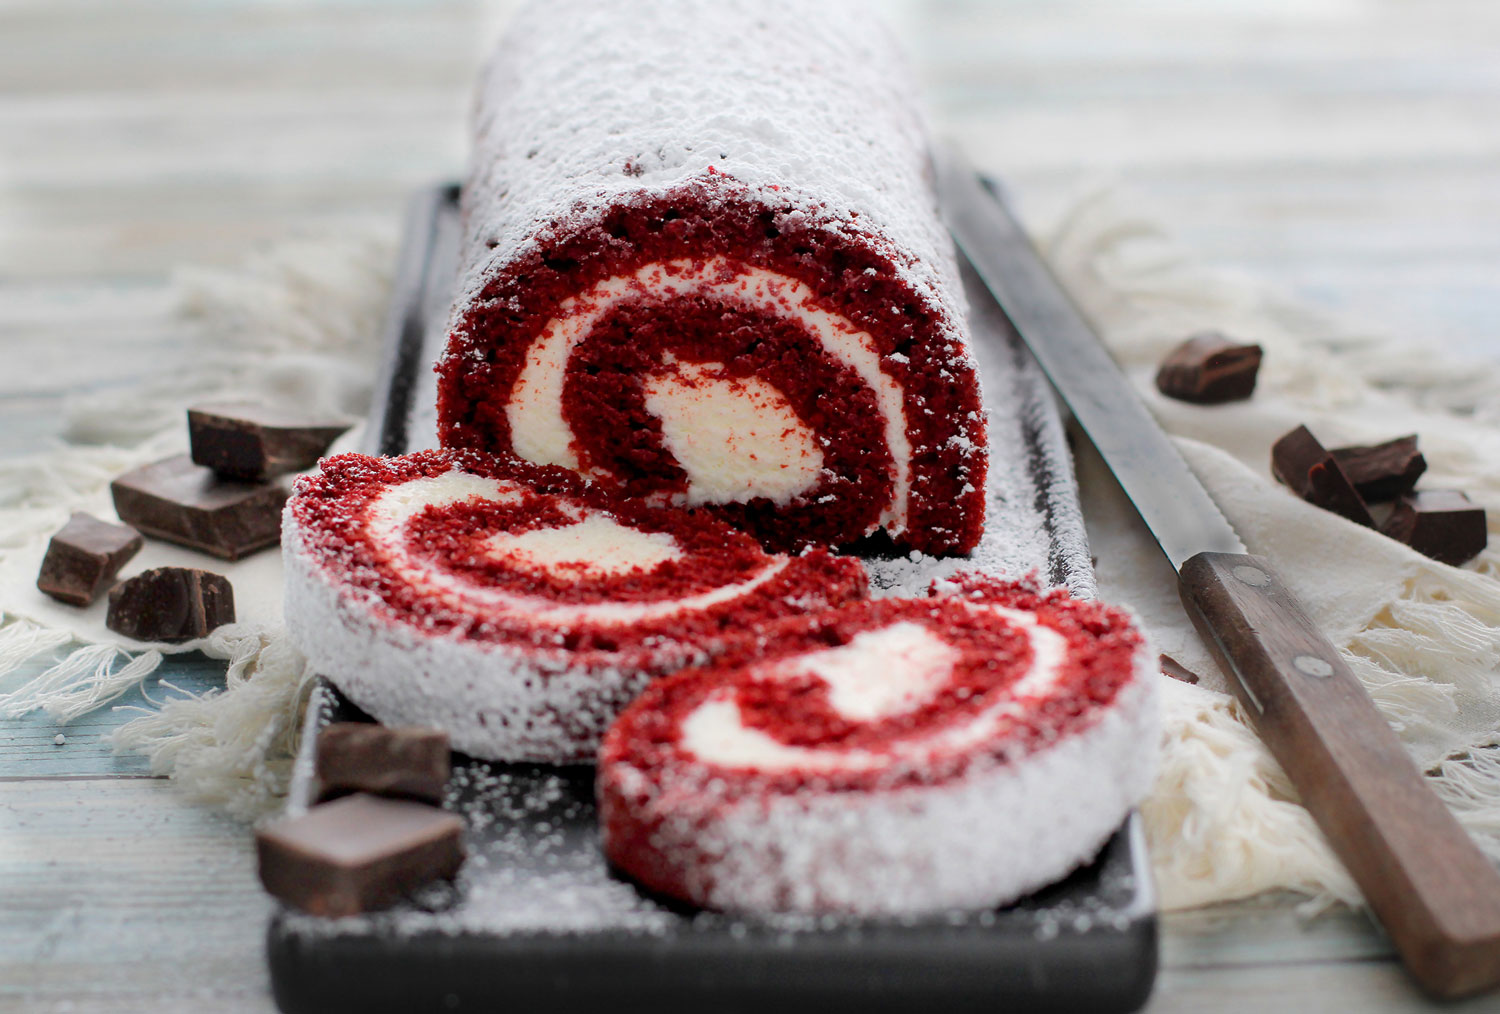 Red velvet cake roll slices on cutting board with knife and chocolate pieces